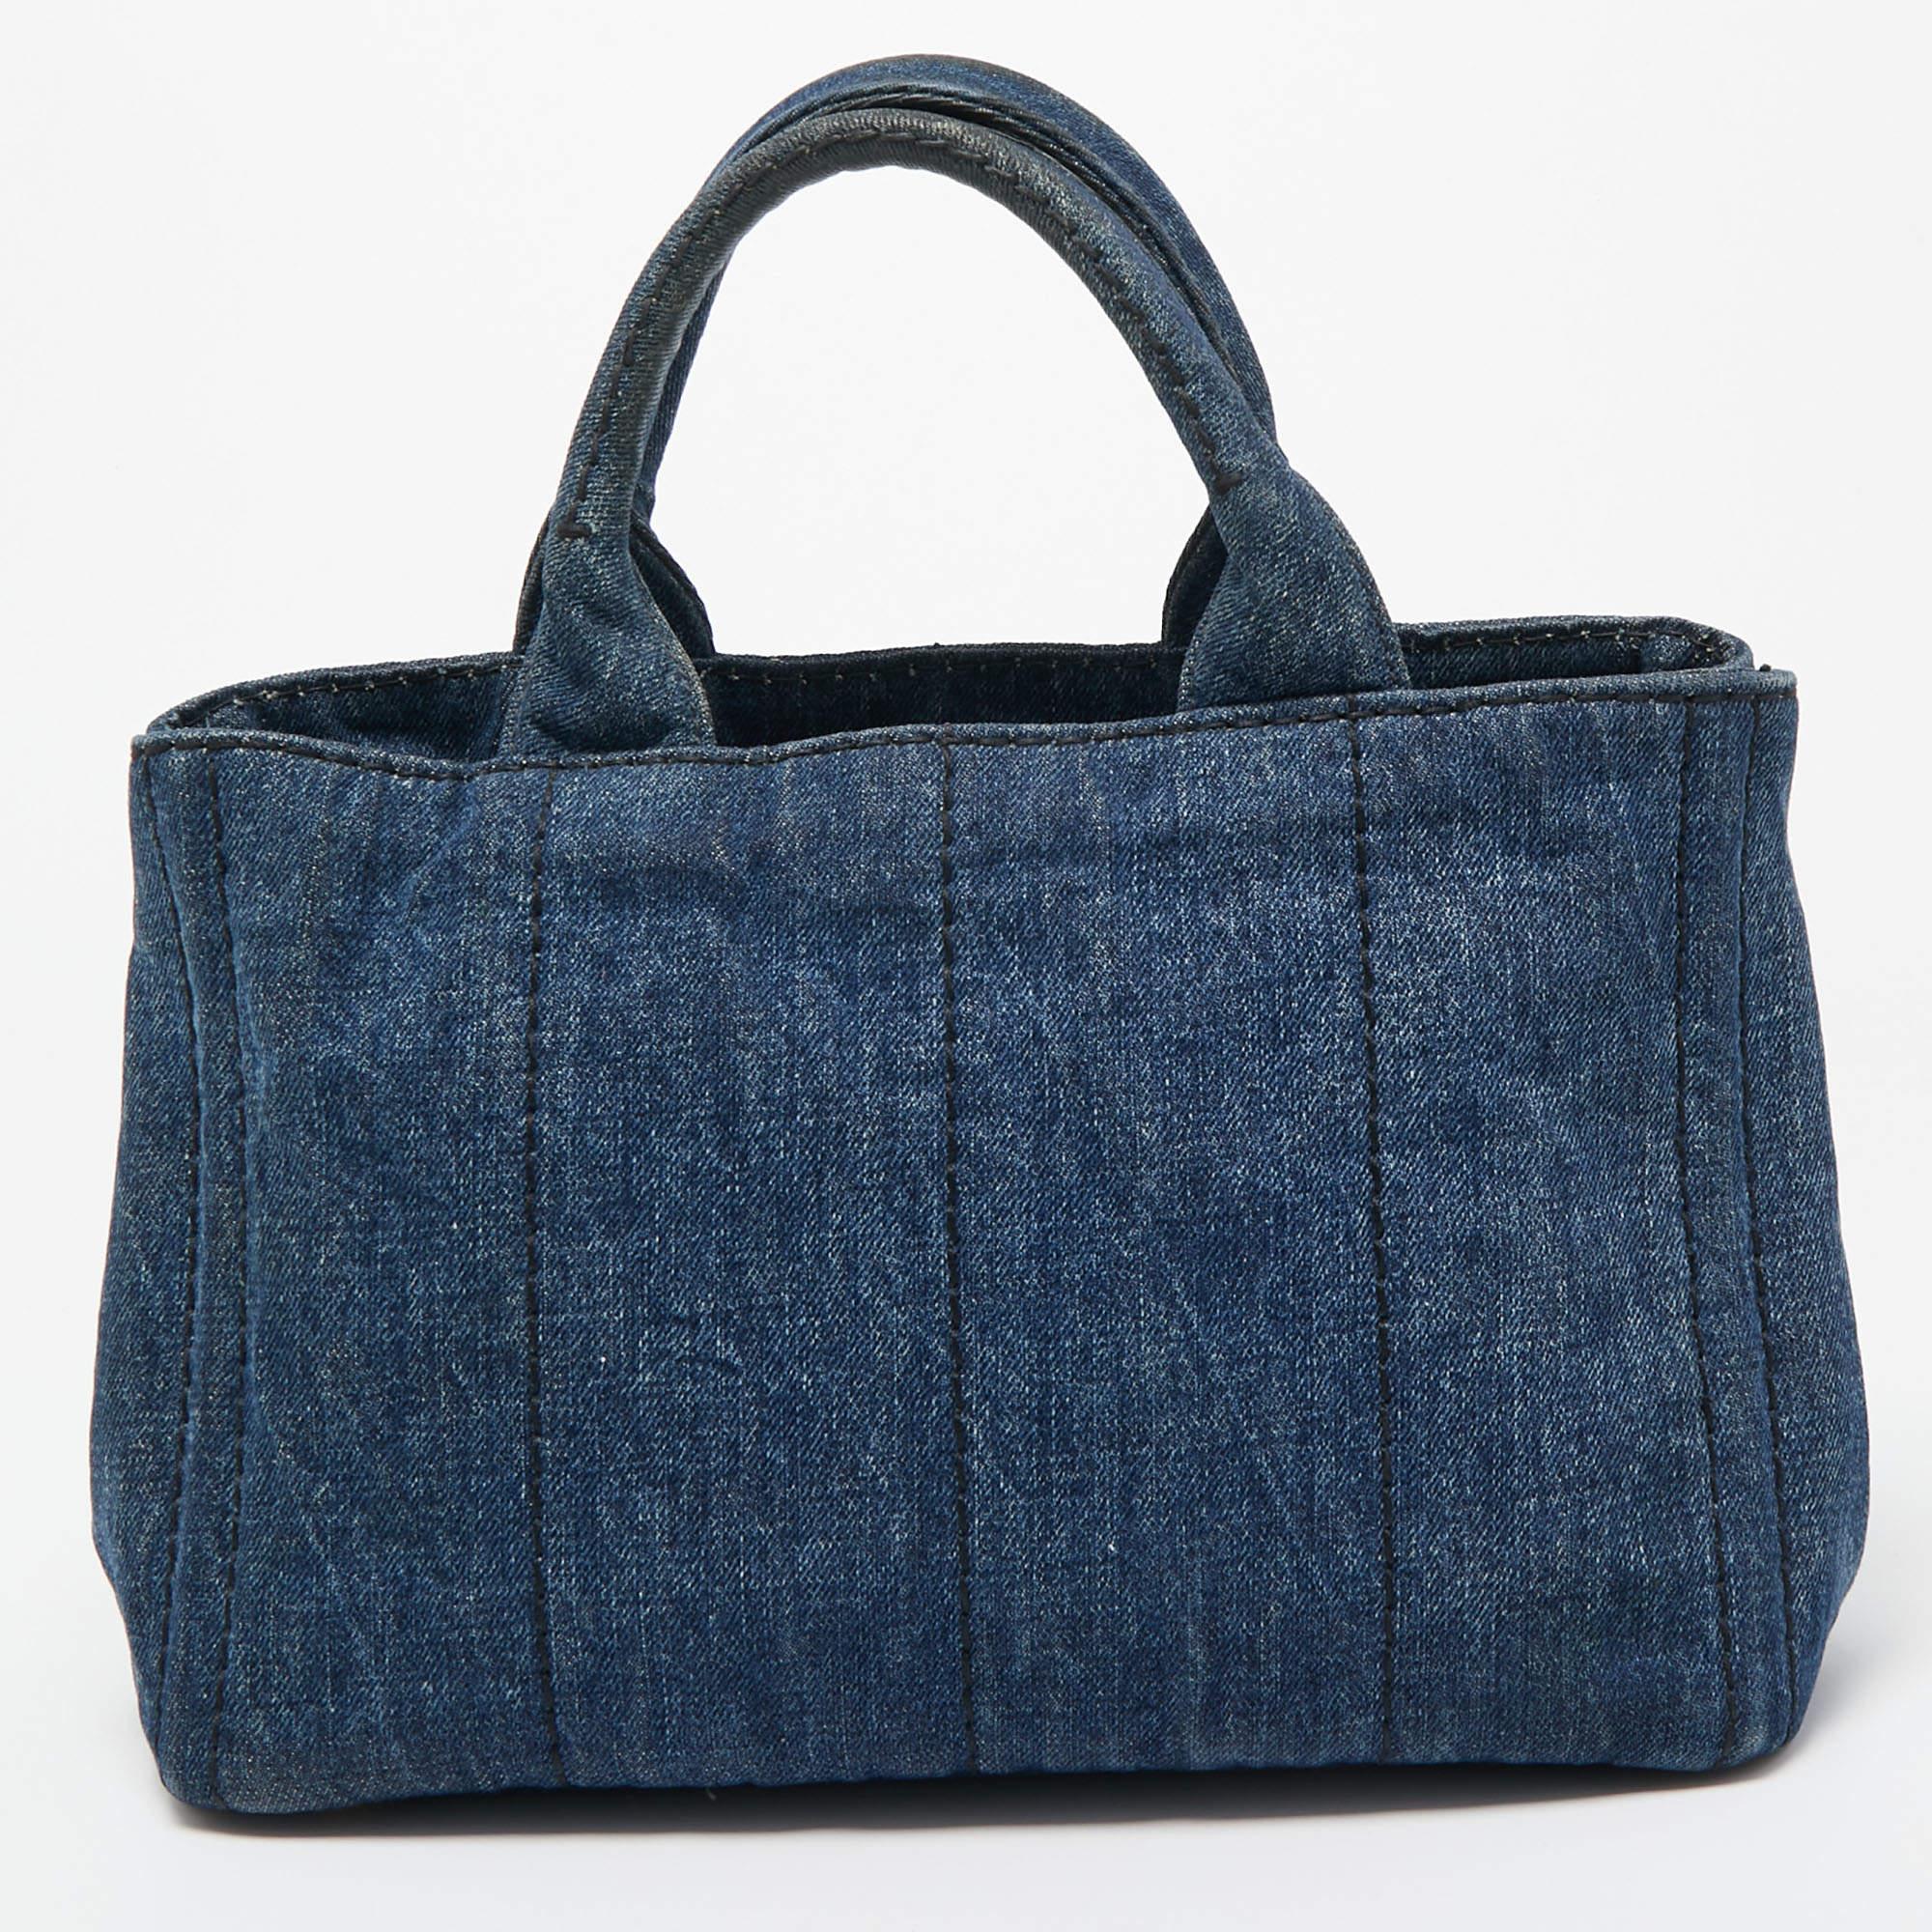 This alluring tote bag for women has been designed to assist you on any day. Convenient to carry and fashionably designed, the tote is cut with skill and sewn into a great shape. It is well-equipped to be a reliable accessory.

Includes: